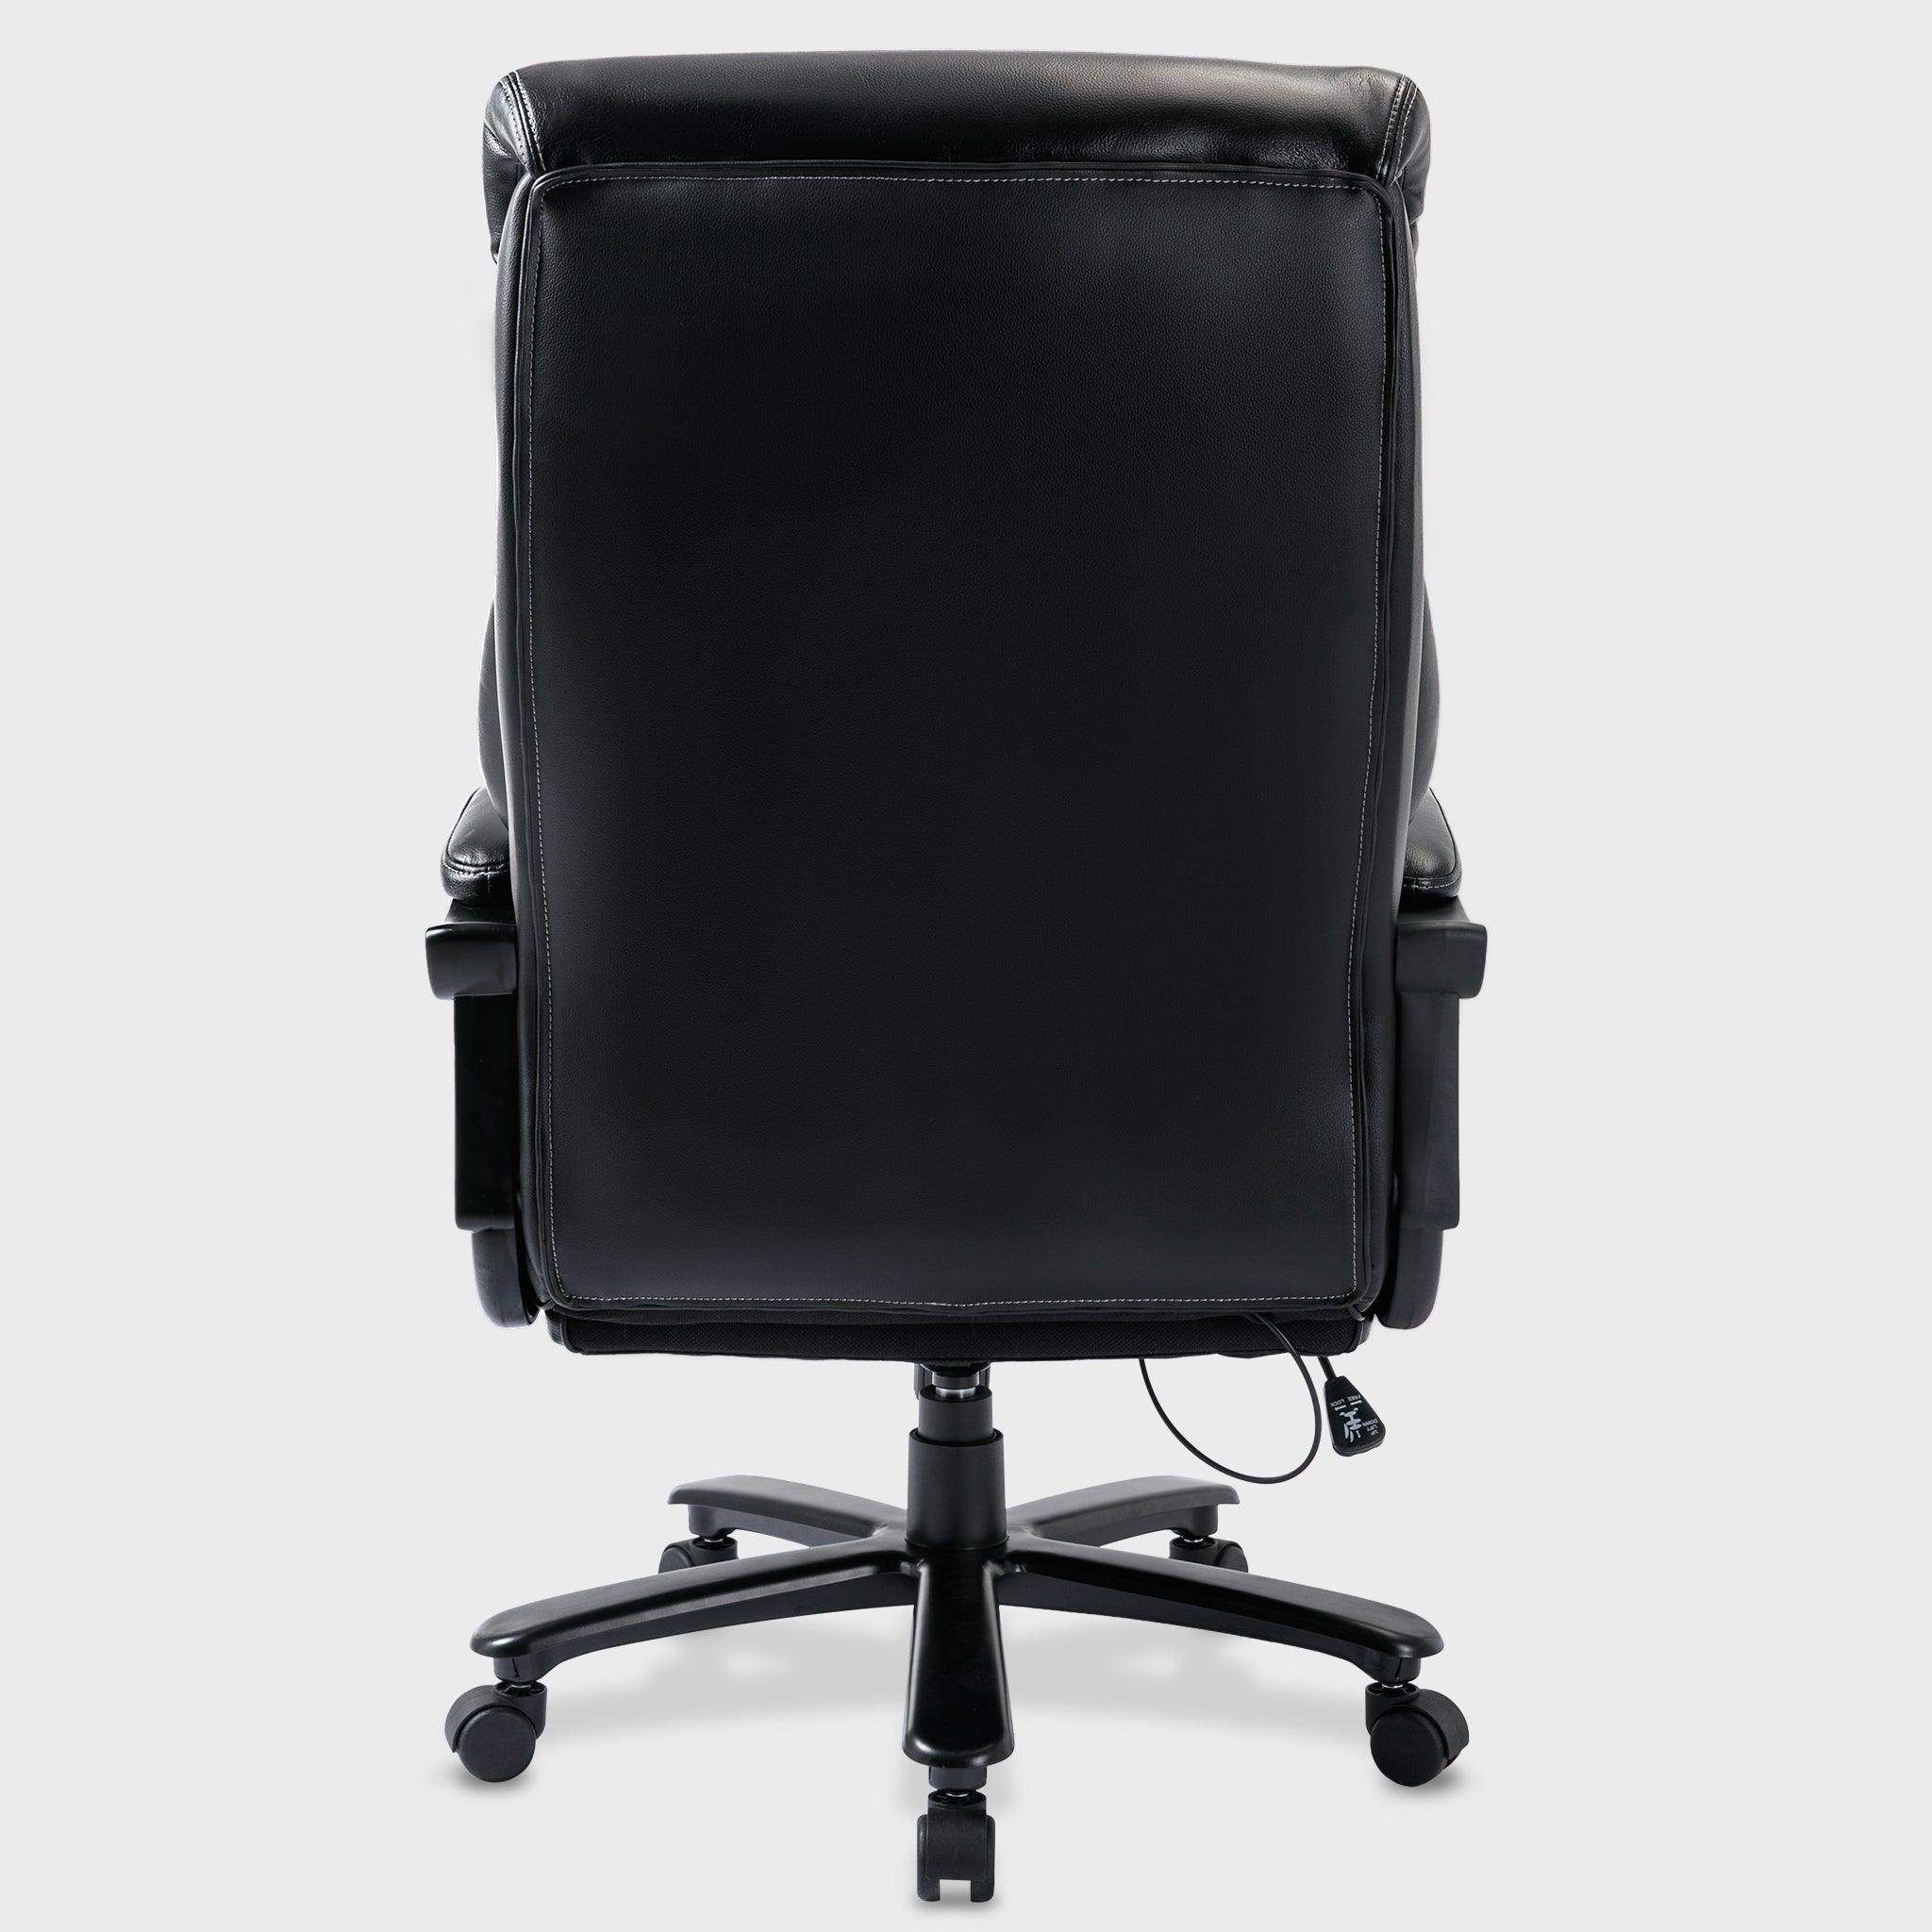 Leather Office Chair Pro 7006 - Honsit Chair